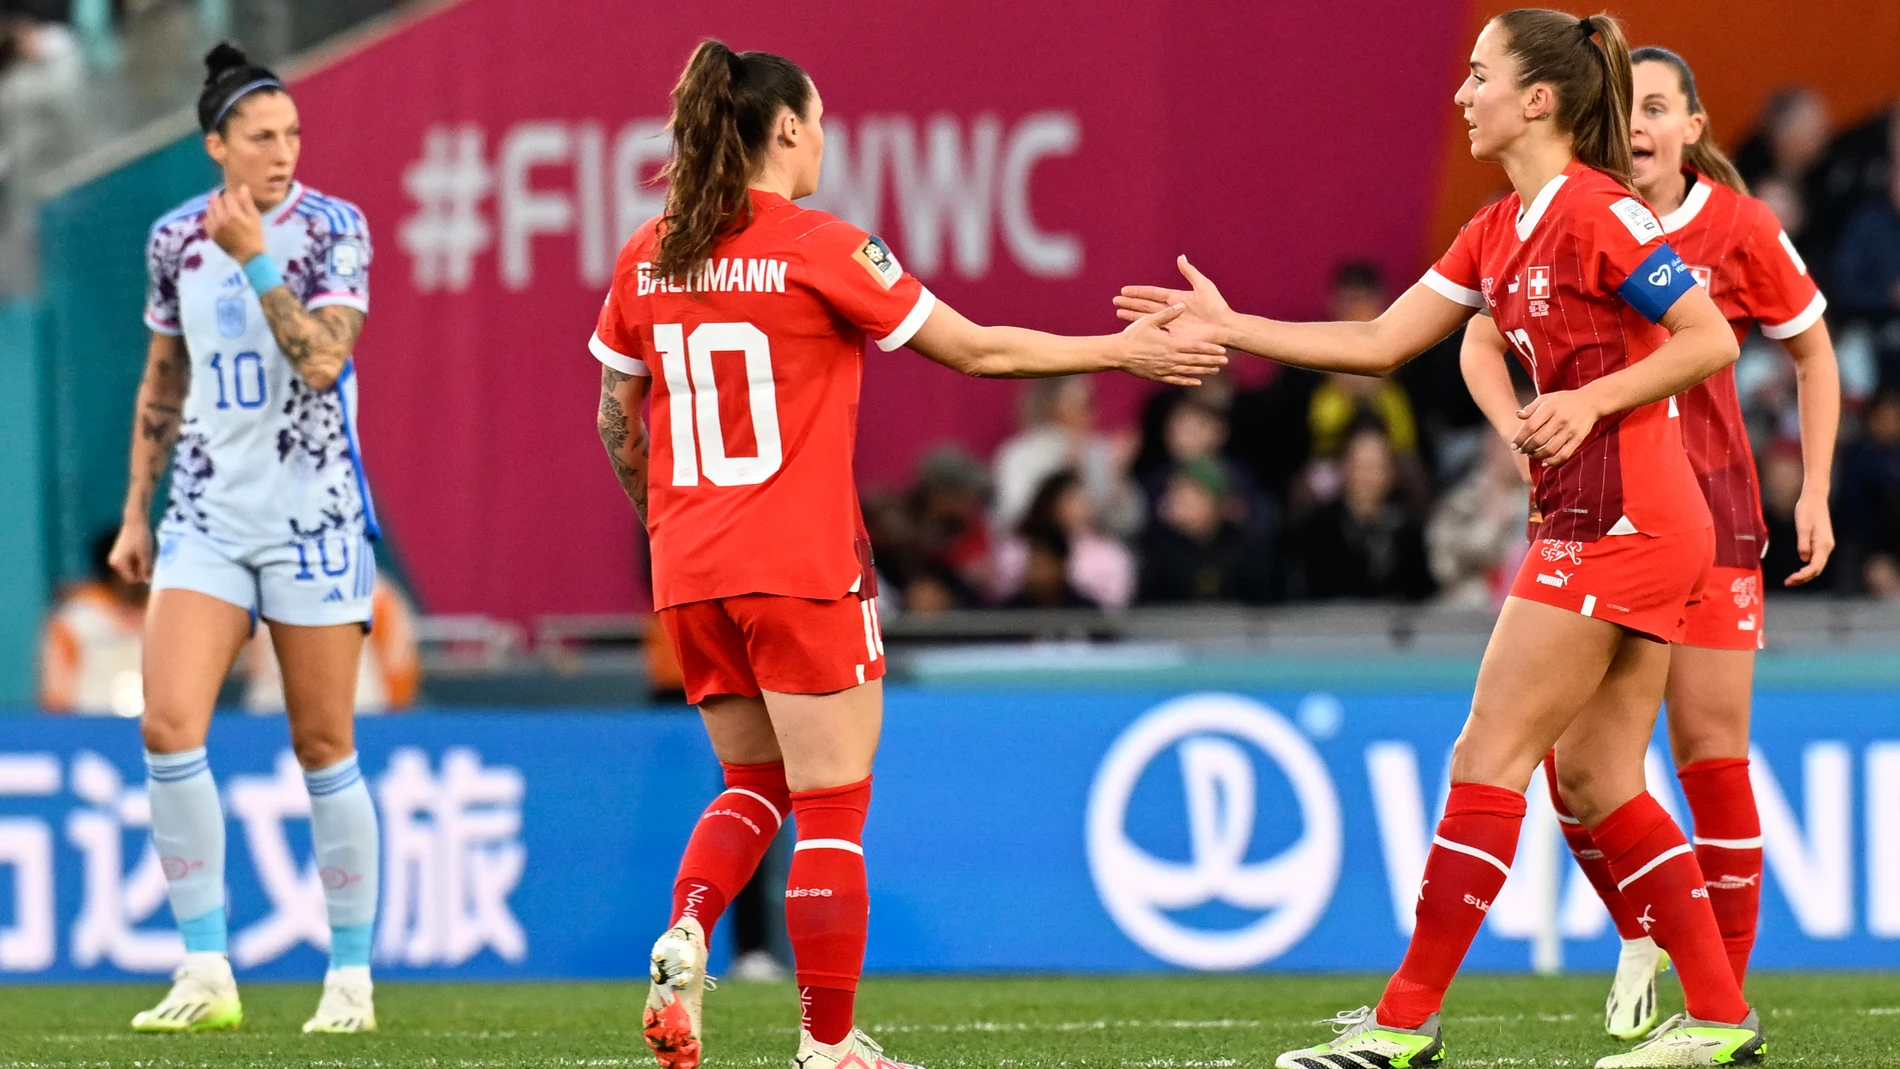 Switzerland's Ramona Bachmann gestures to teammate Lia Waelti, right, following an own goal by Spain's Laia Codina during the Women's World Cup second round soccer match between Switzerland and Spain at Eden Park in Auckland, New Zealand, Saturday, Aug. 5, 2023. (AP Photo/Andrew Cornaga)